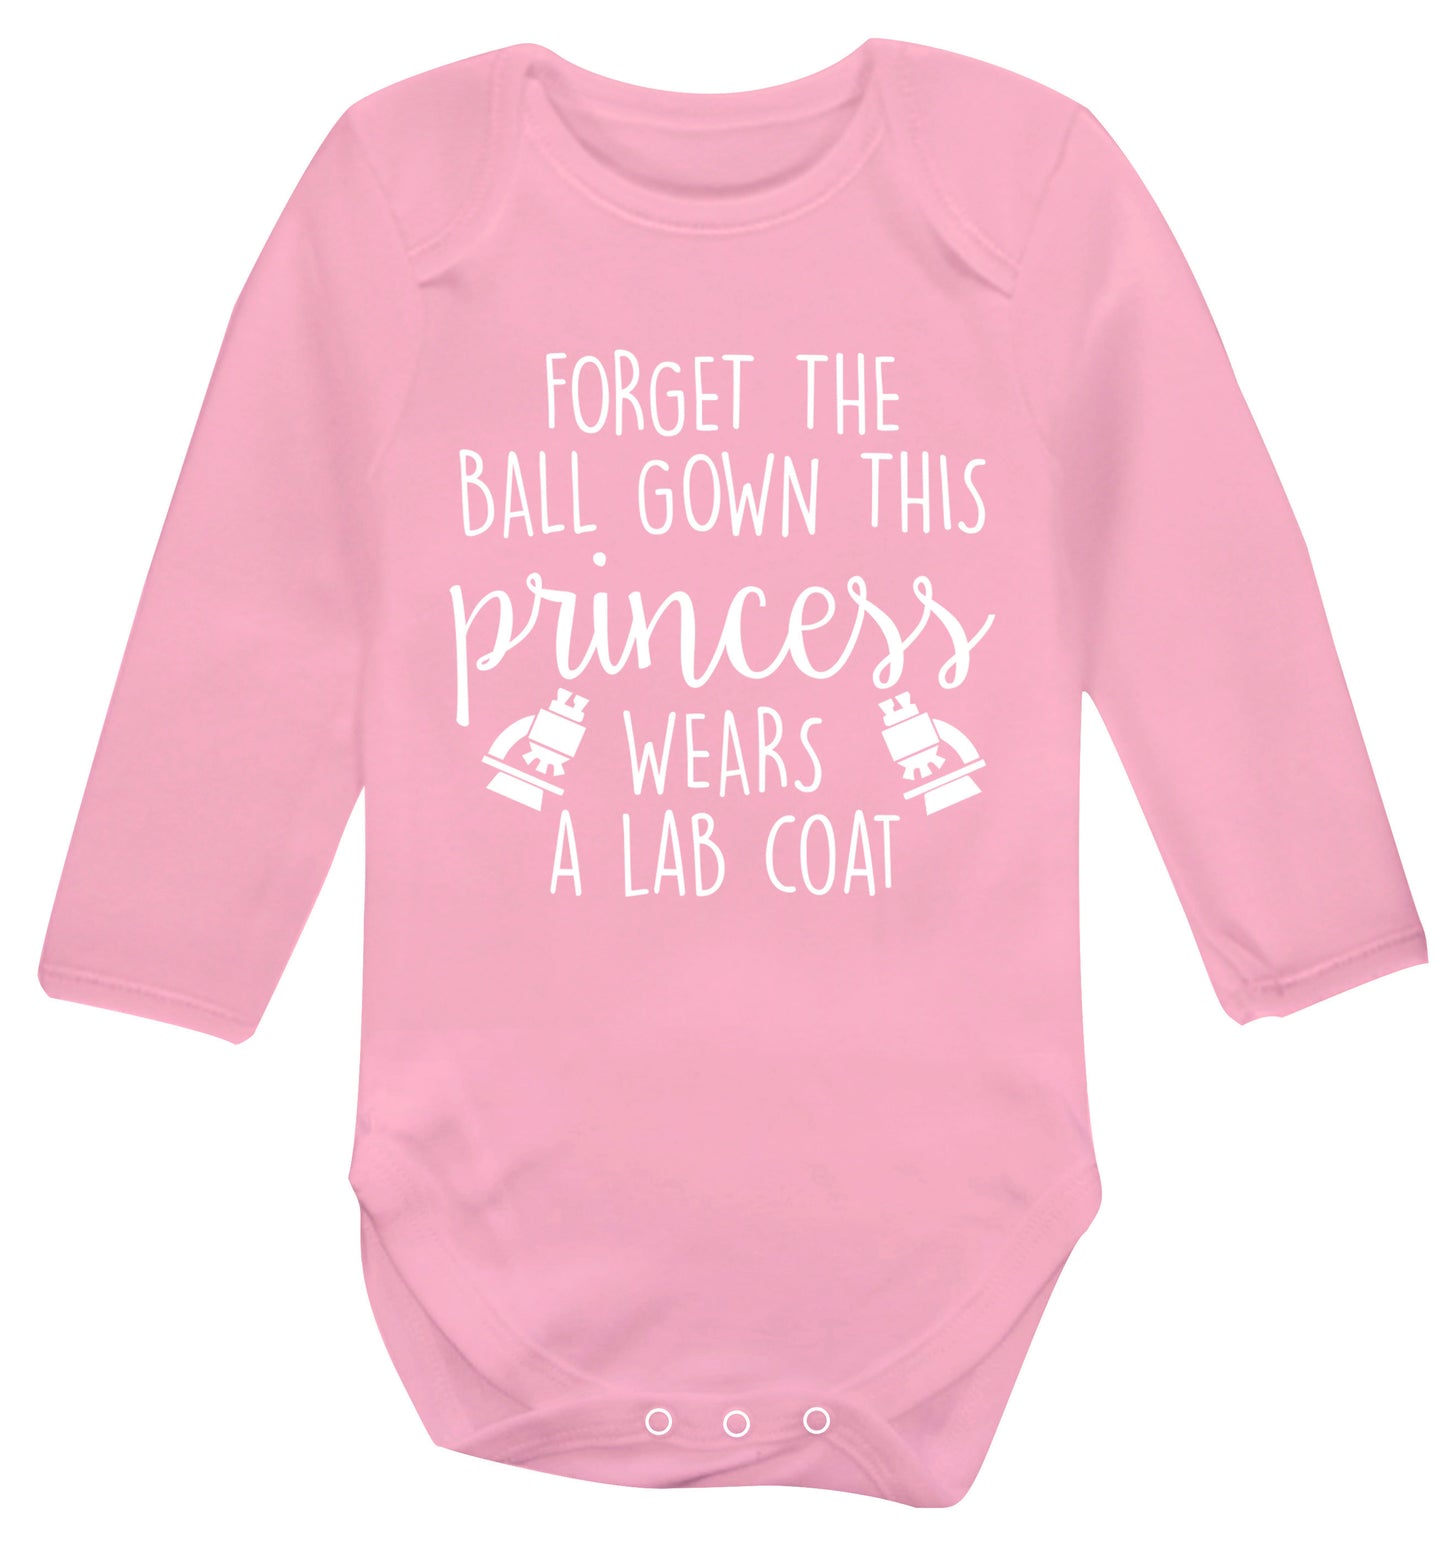 Forget the ball gown this princess wears a lab coat Baby Vest long sleeved pale pink 6-12 months